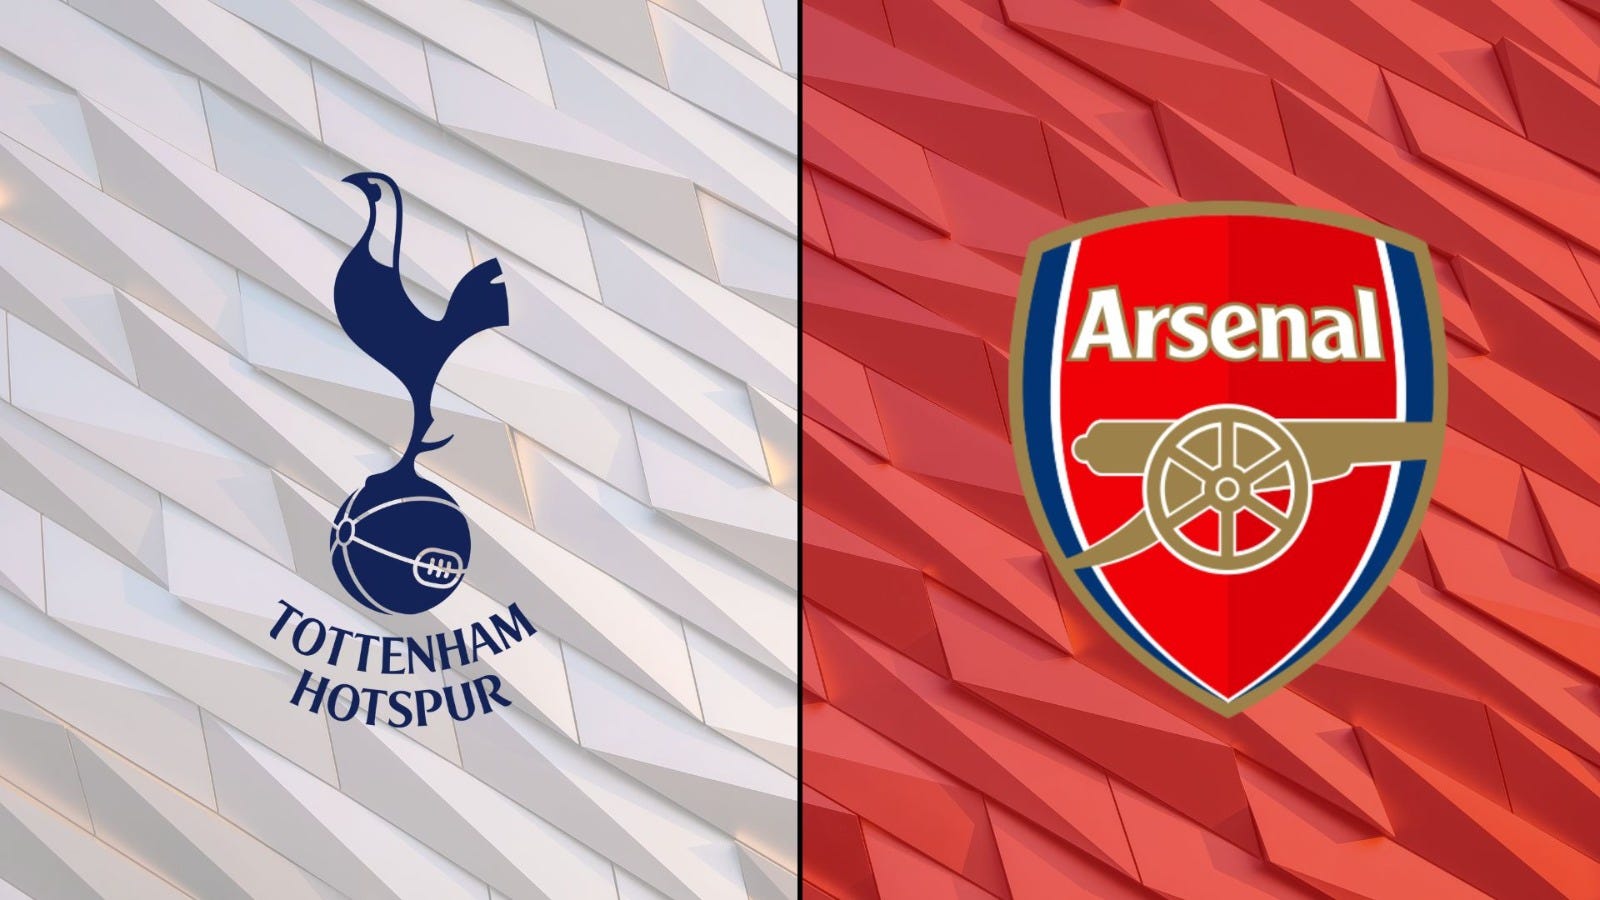 Tottenham vs Arsenal Live stream, TV channel, kick-off time and where to watch Goal English Oman